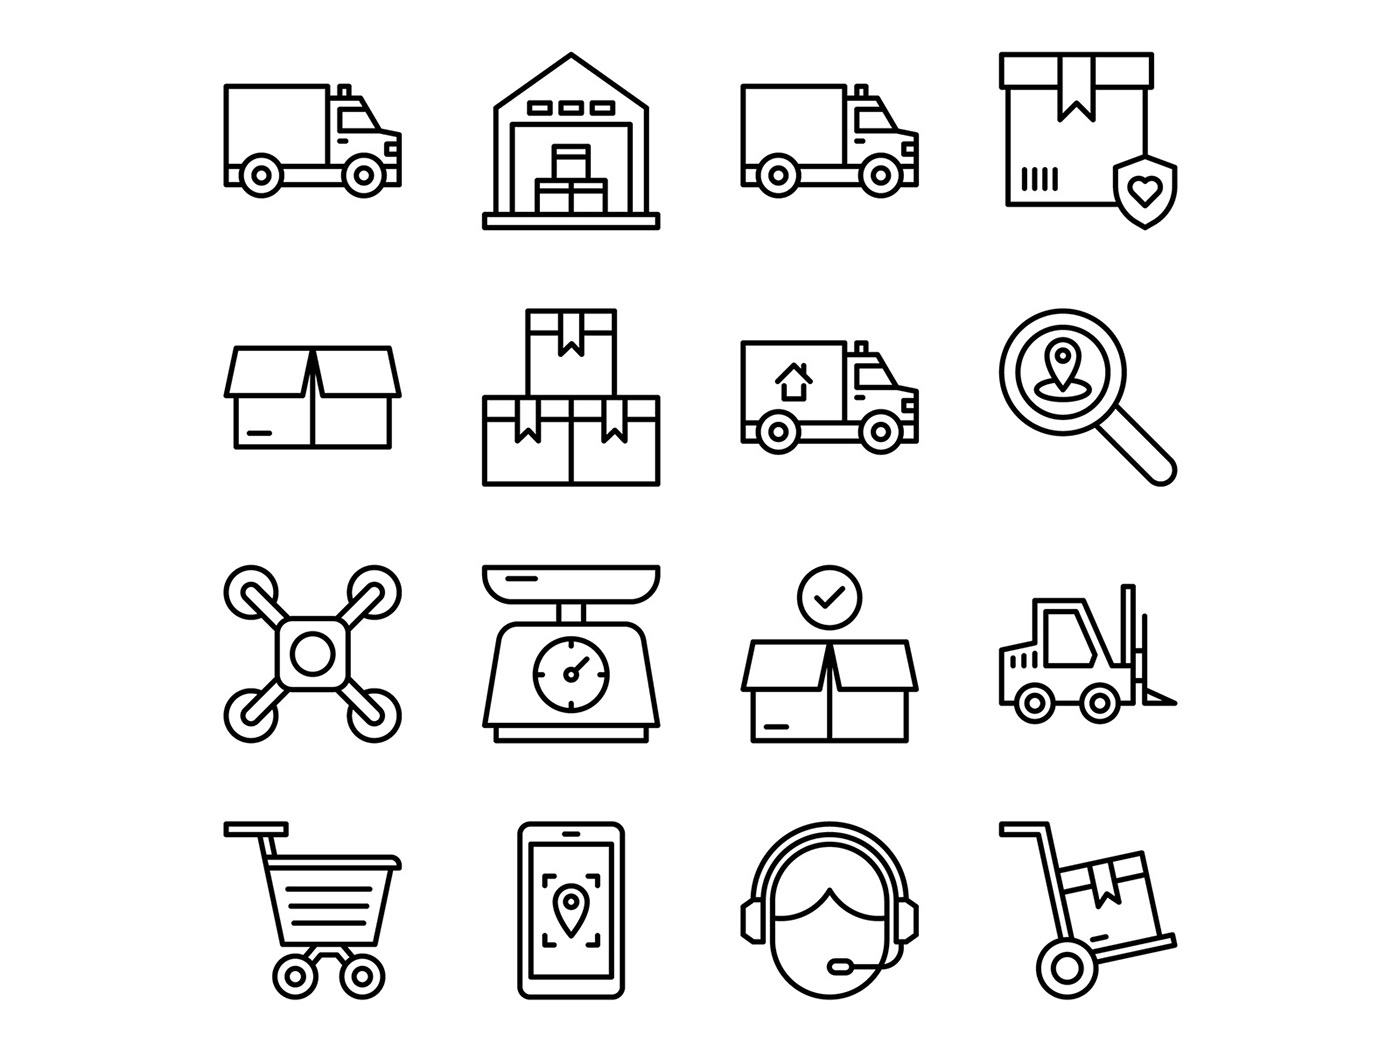 freebie icon design  icons download icons pack icons set logistic vector Logistics logistics icon vector design vector icon